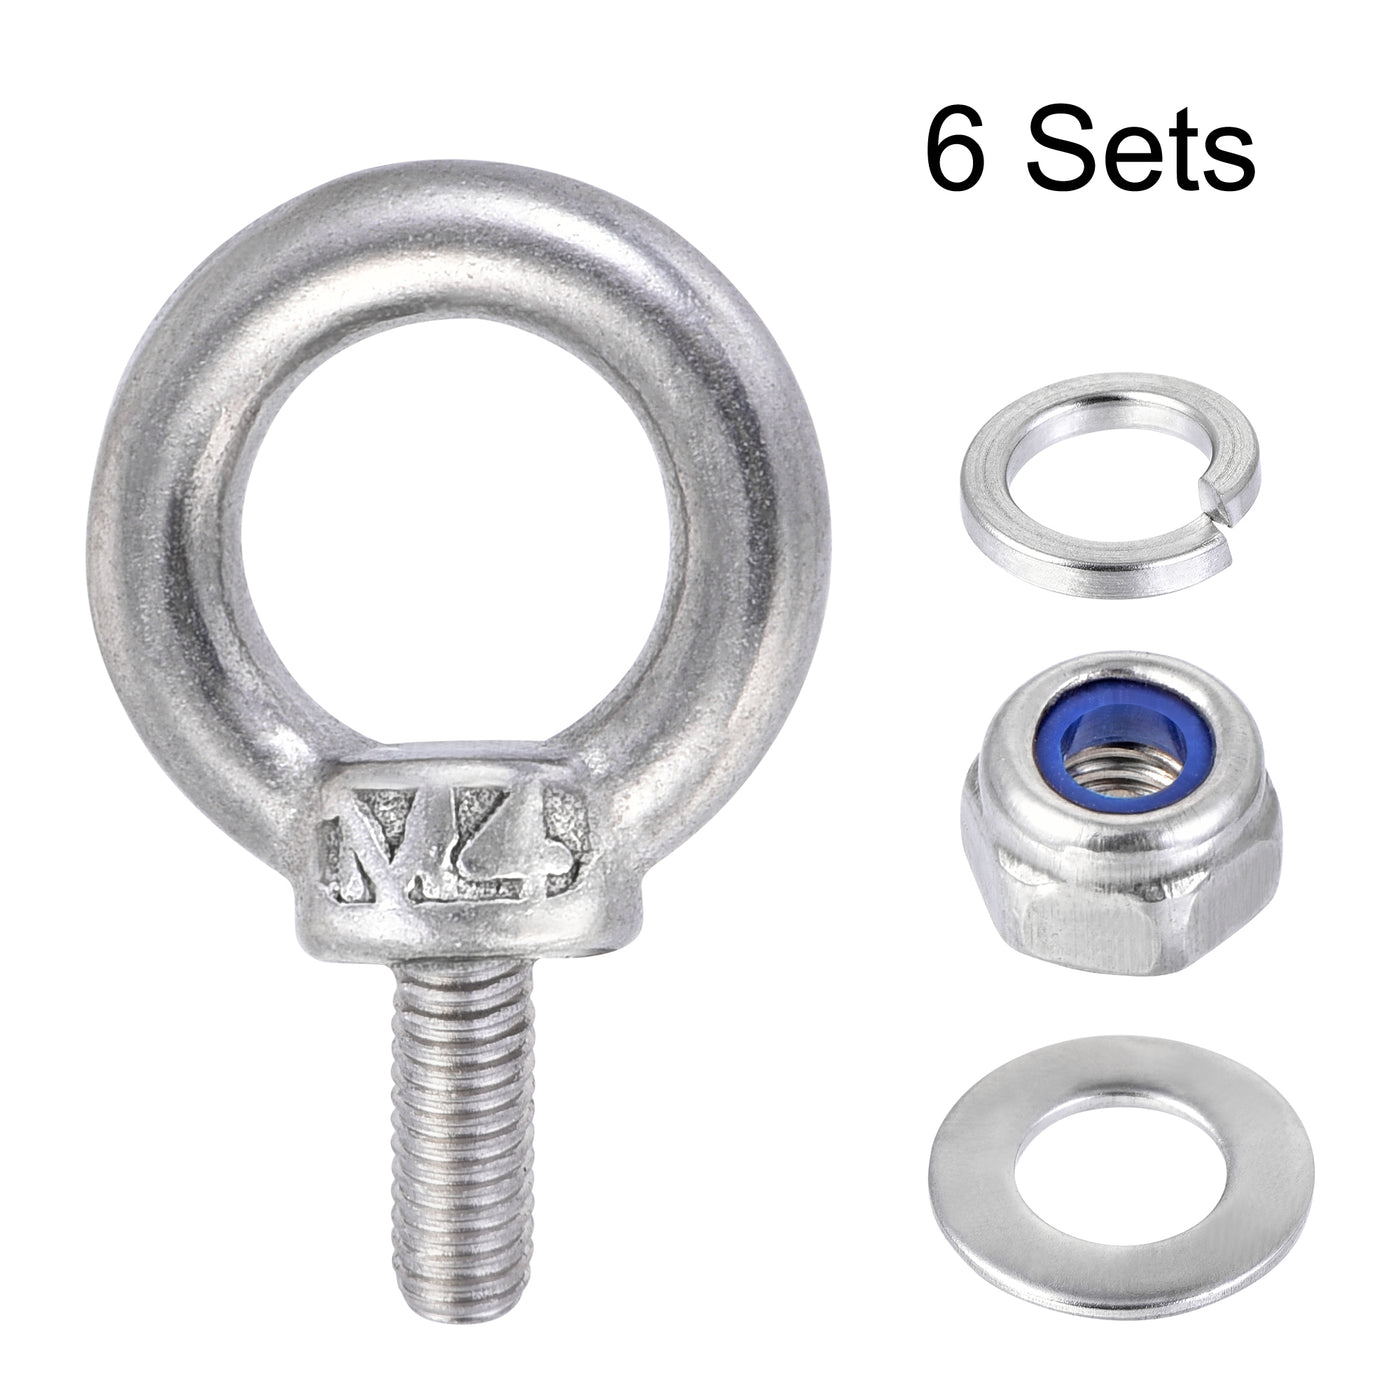 uxcell Uxcell Lifting Eye Bolt M4 x 11mm Male Thread with Hex Screw Nut Gasket Flat Washer for Hanging, 304 Stainless Steel, 6 Sets